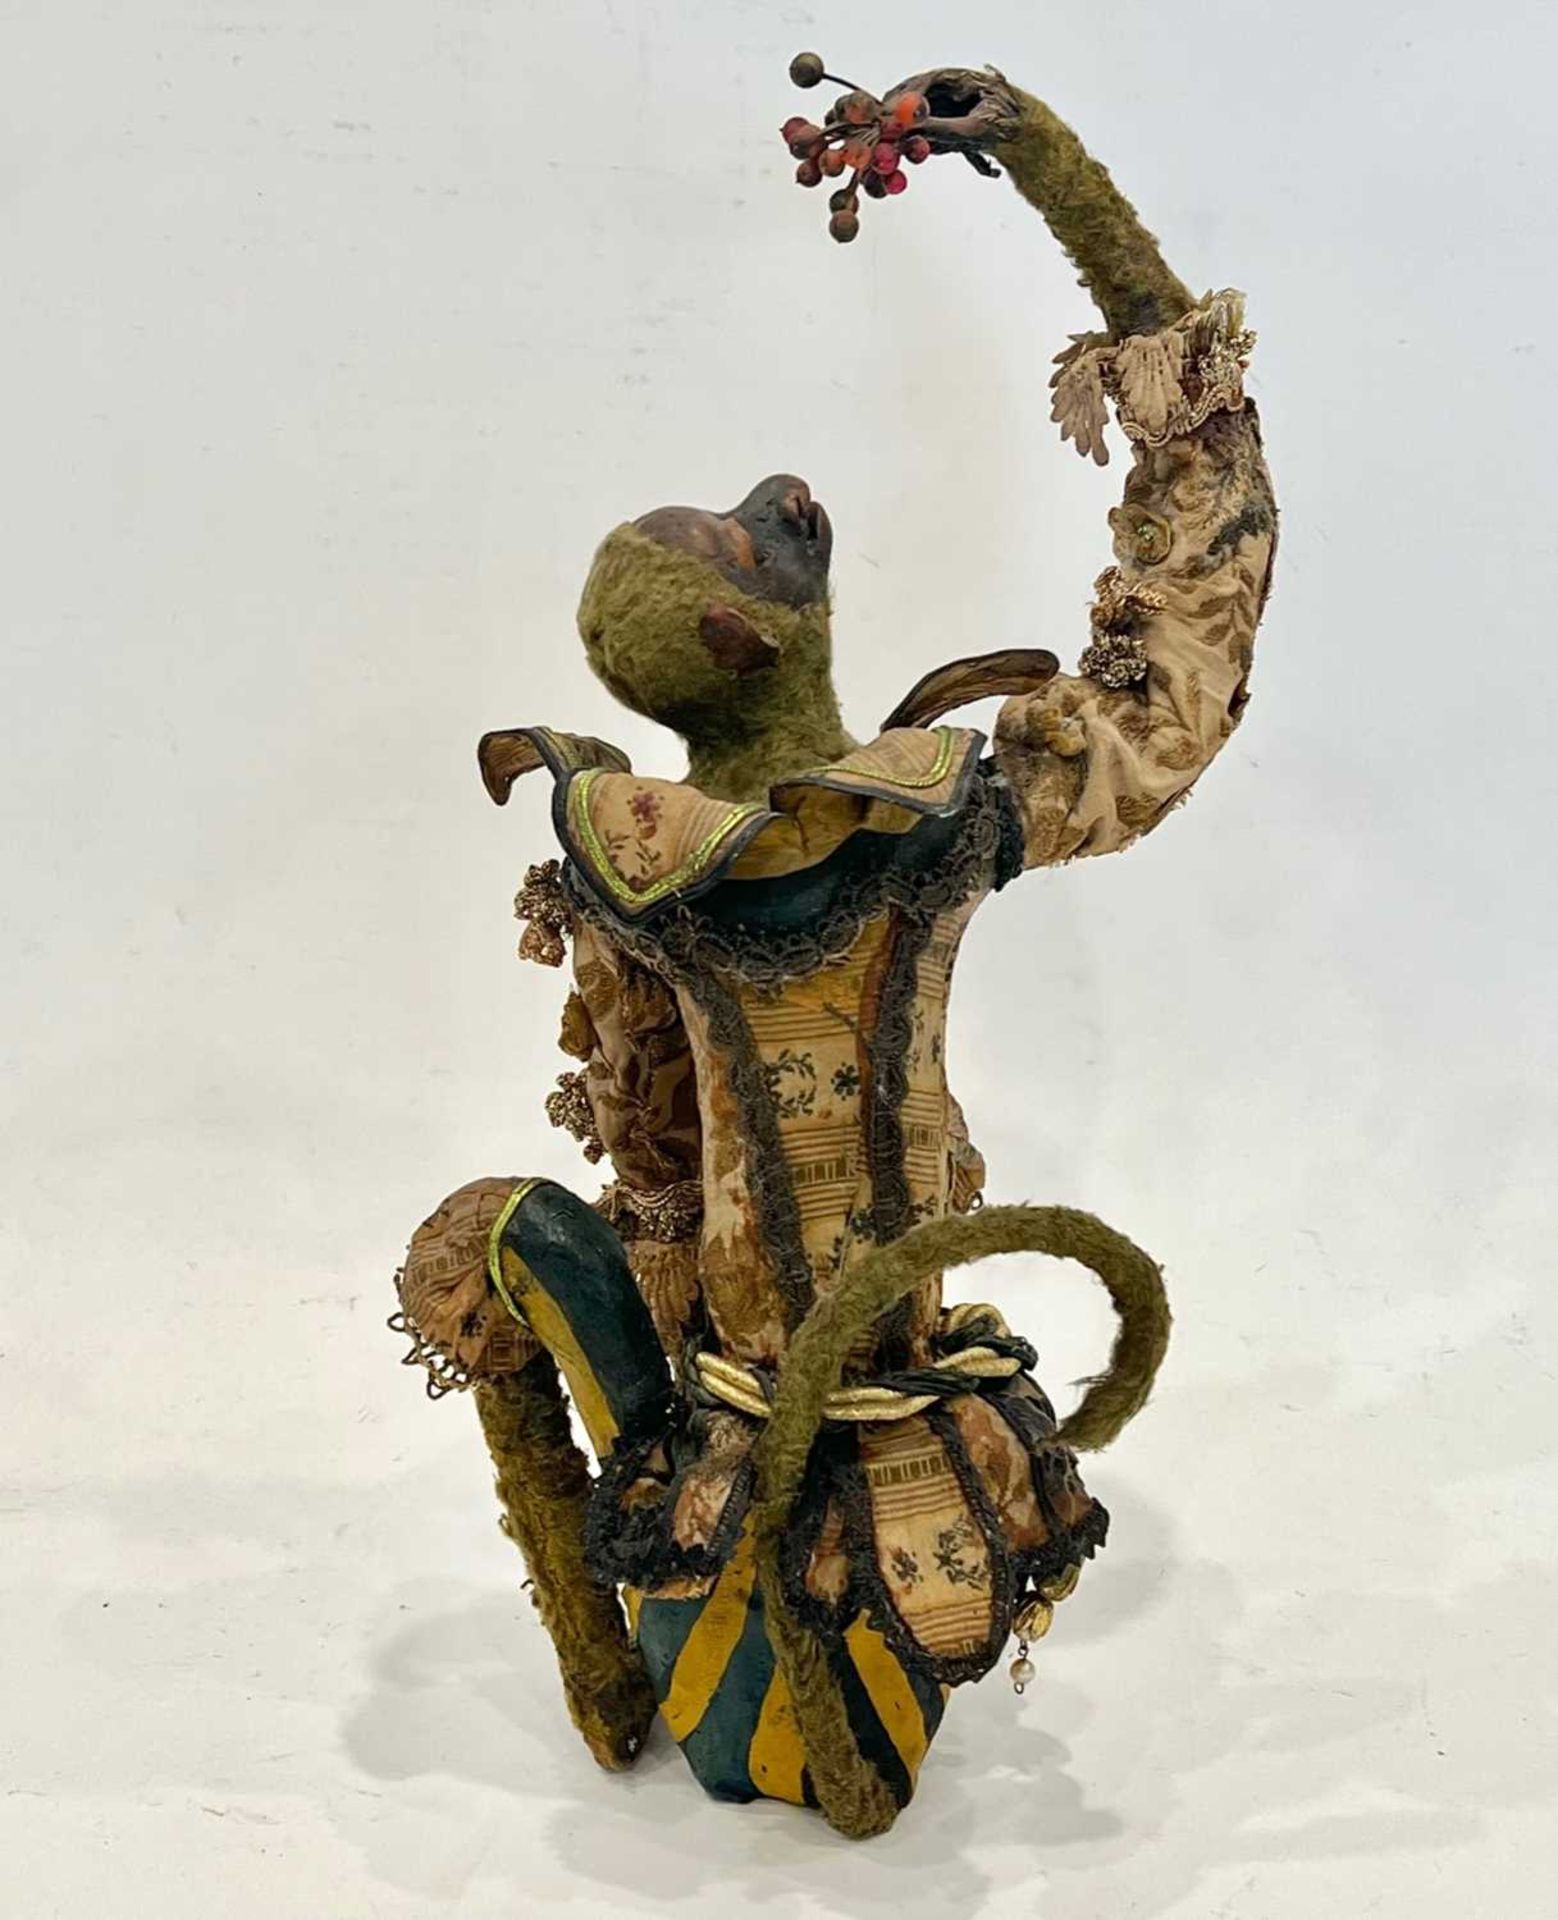 A NEAPOLITAN STYLE MODEL OF A MONKEY DRESSED AS A COURT JESTER - Image 2 of 3